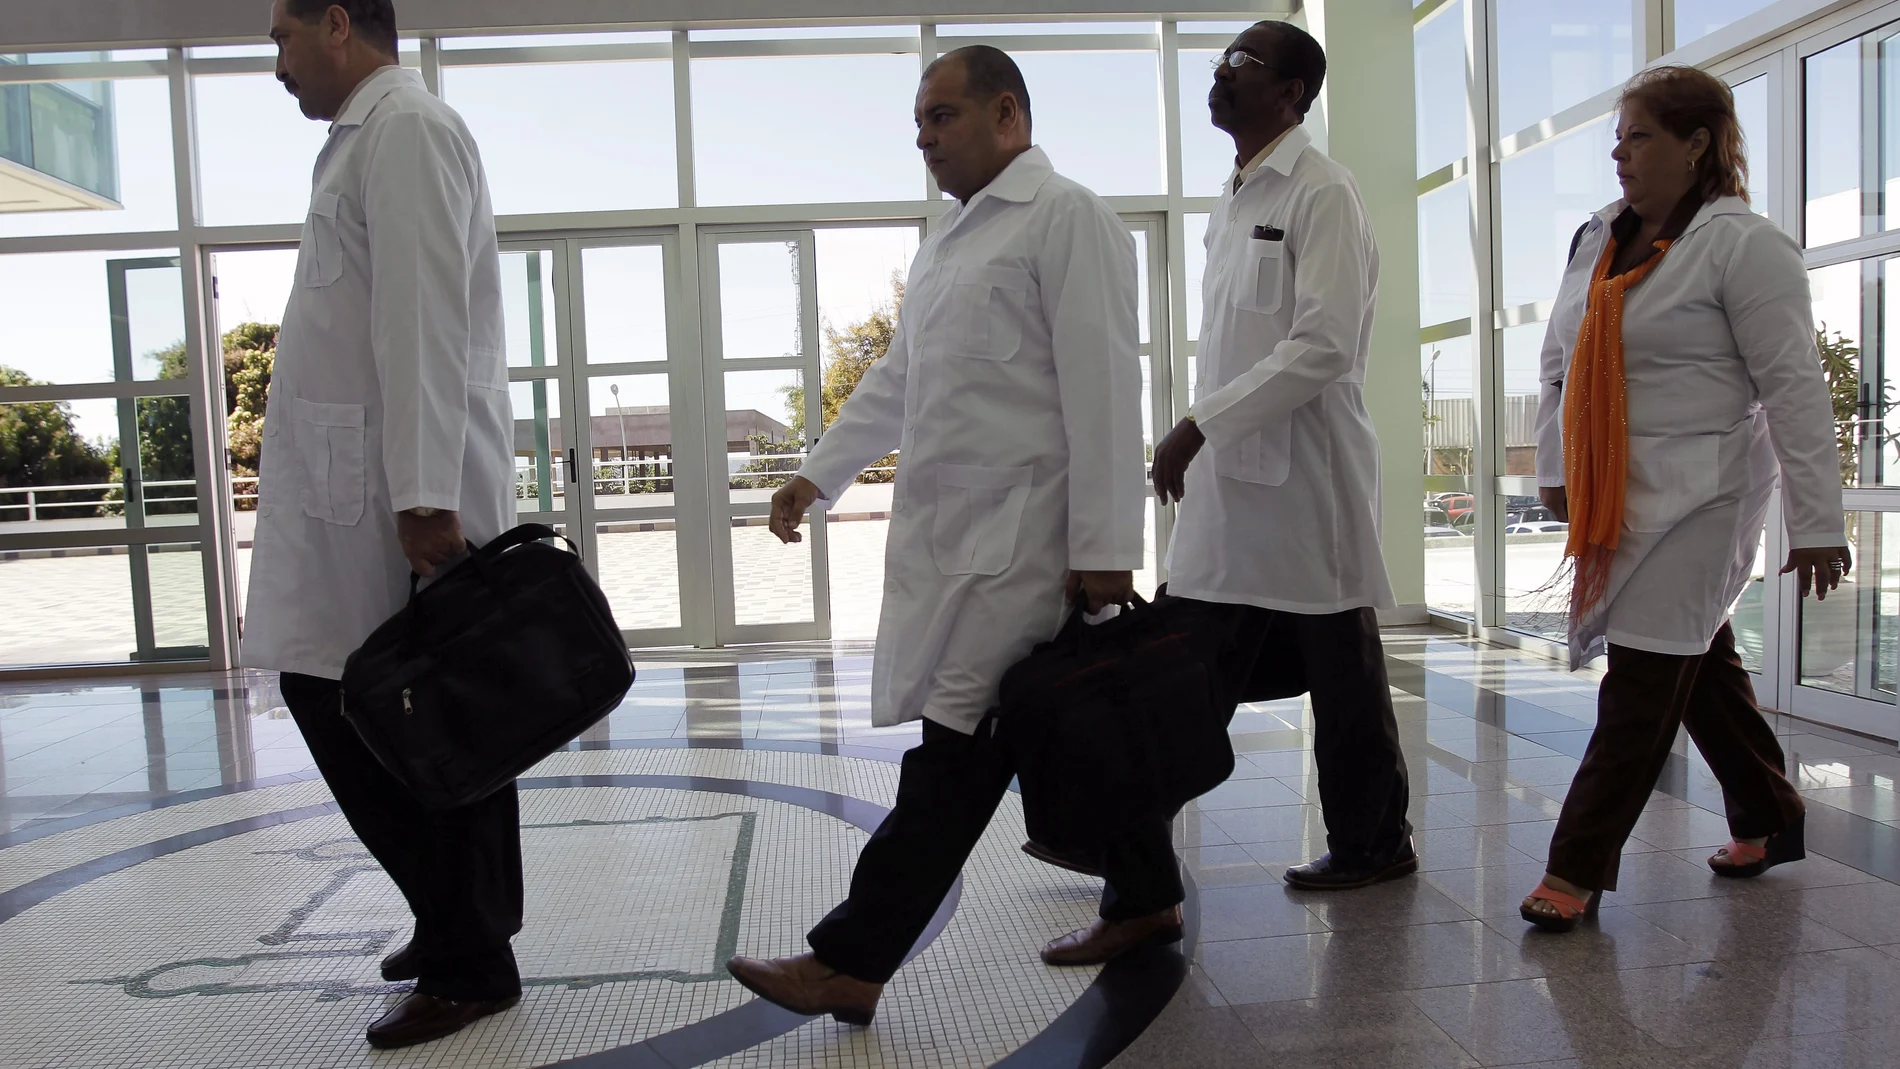 FILE - In this Aug. 26, 2013 file photo, Cuban doctors arrive for training before being assigned to work in impoverished areas where physicians and medical services are scarce, at the University of Brasilia in Brasilia, Brazil. A federal judge paved the way on Monday, Nov. 9, 2020, for a lawsuit against the Pan American Health Organization for its alleged role in the human trafficking of Cuban doctors to Brazil between 2013 and 2018 to be heard in the United States courts. (AP Photo/Eraldo Peres, File)